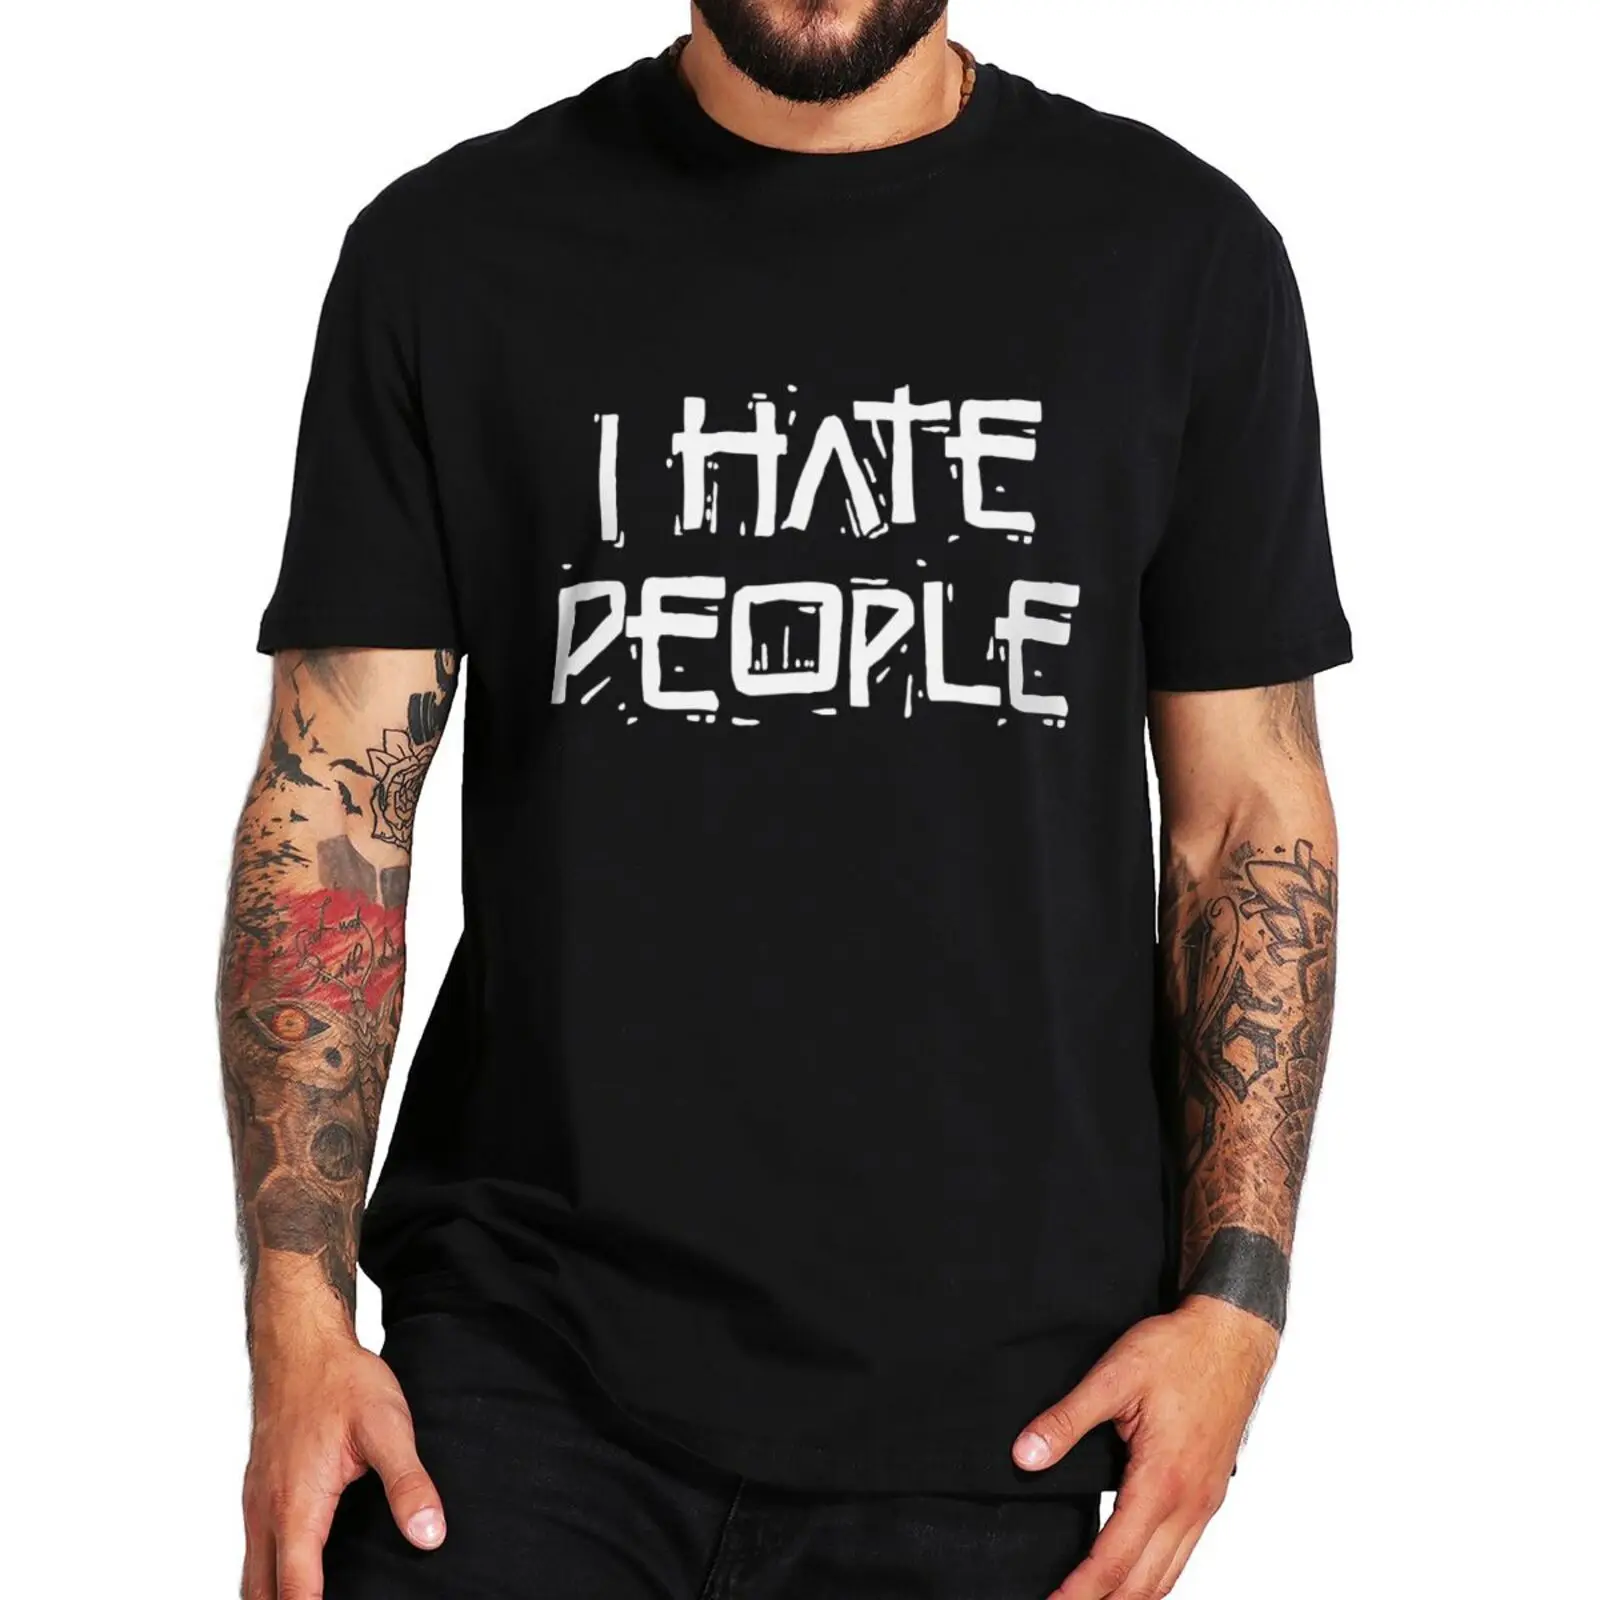 

I Hate People T Shirt Funny Sayings Adult Humor Introverted Nerd Gift Tee Tops EU Size 100% Cotton Summer Casual Unisex T-shirts